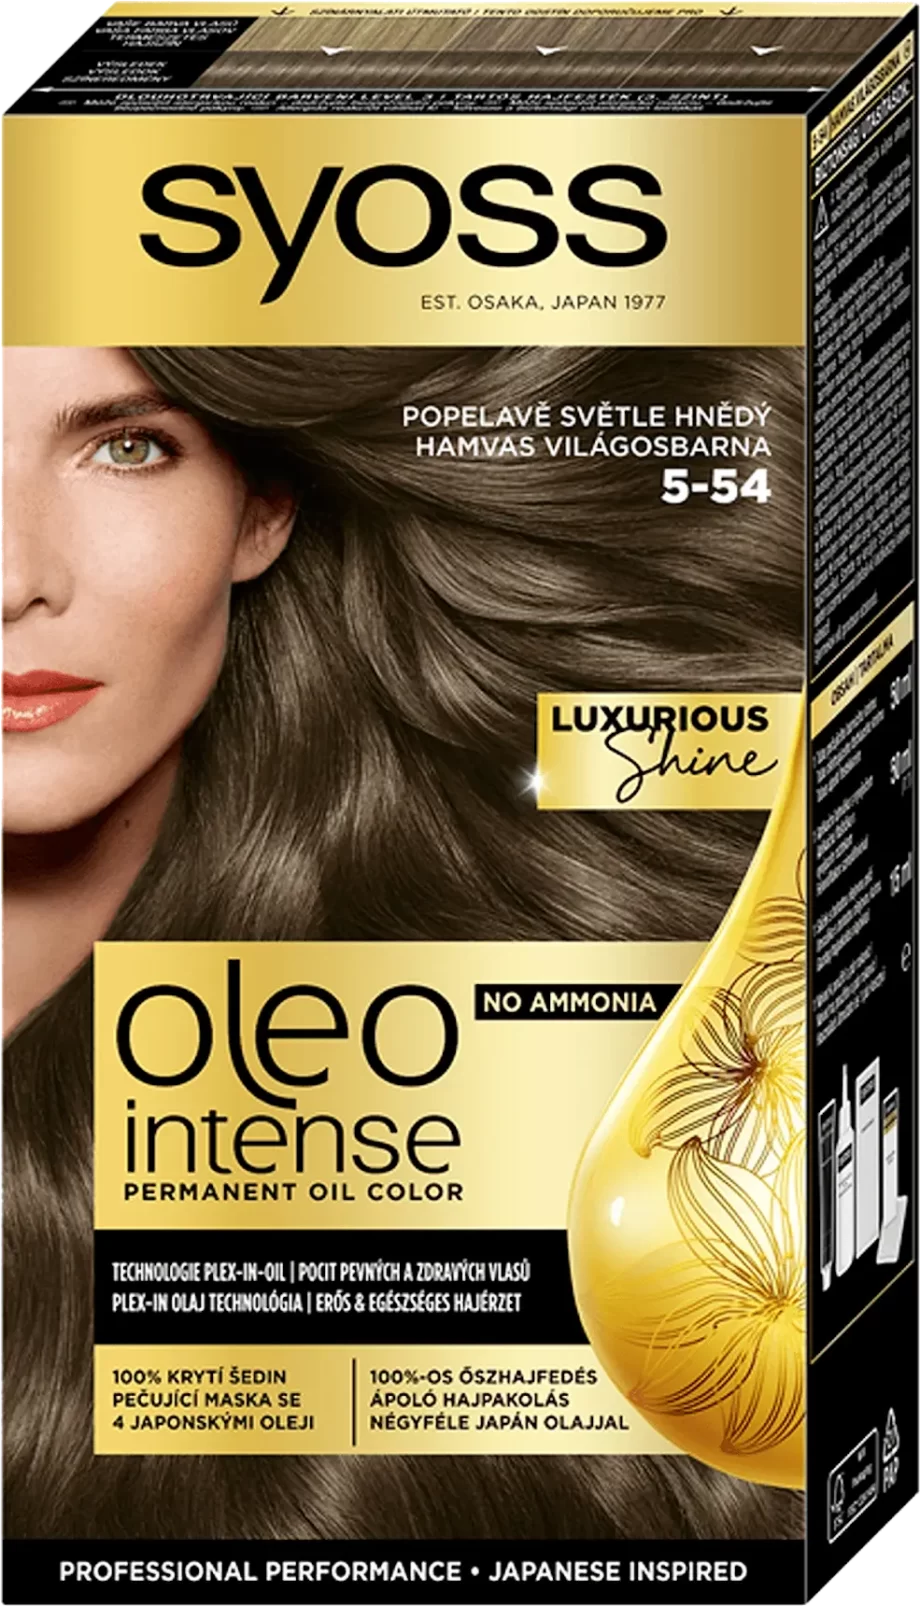 syoss oleo intense 5-54 ash light brown permanent oil color